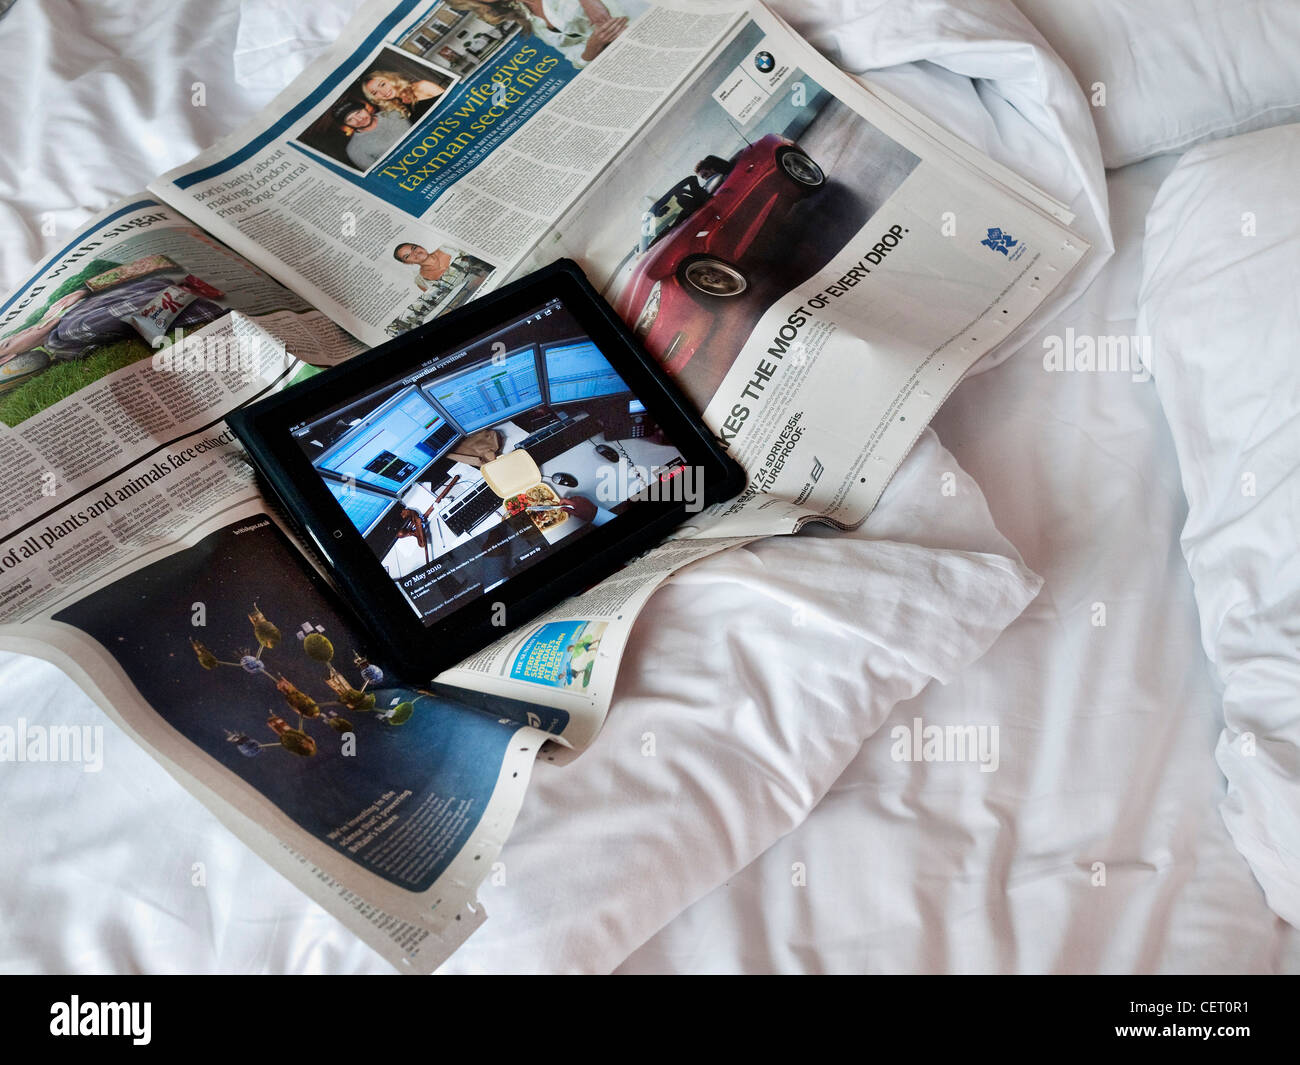 Apple iPad with sunday papers on unmade bed Stock Photo